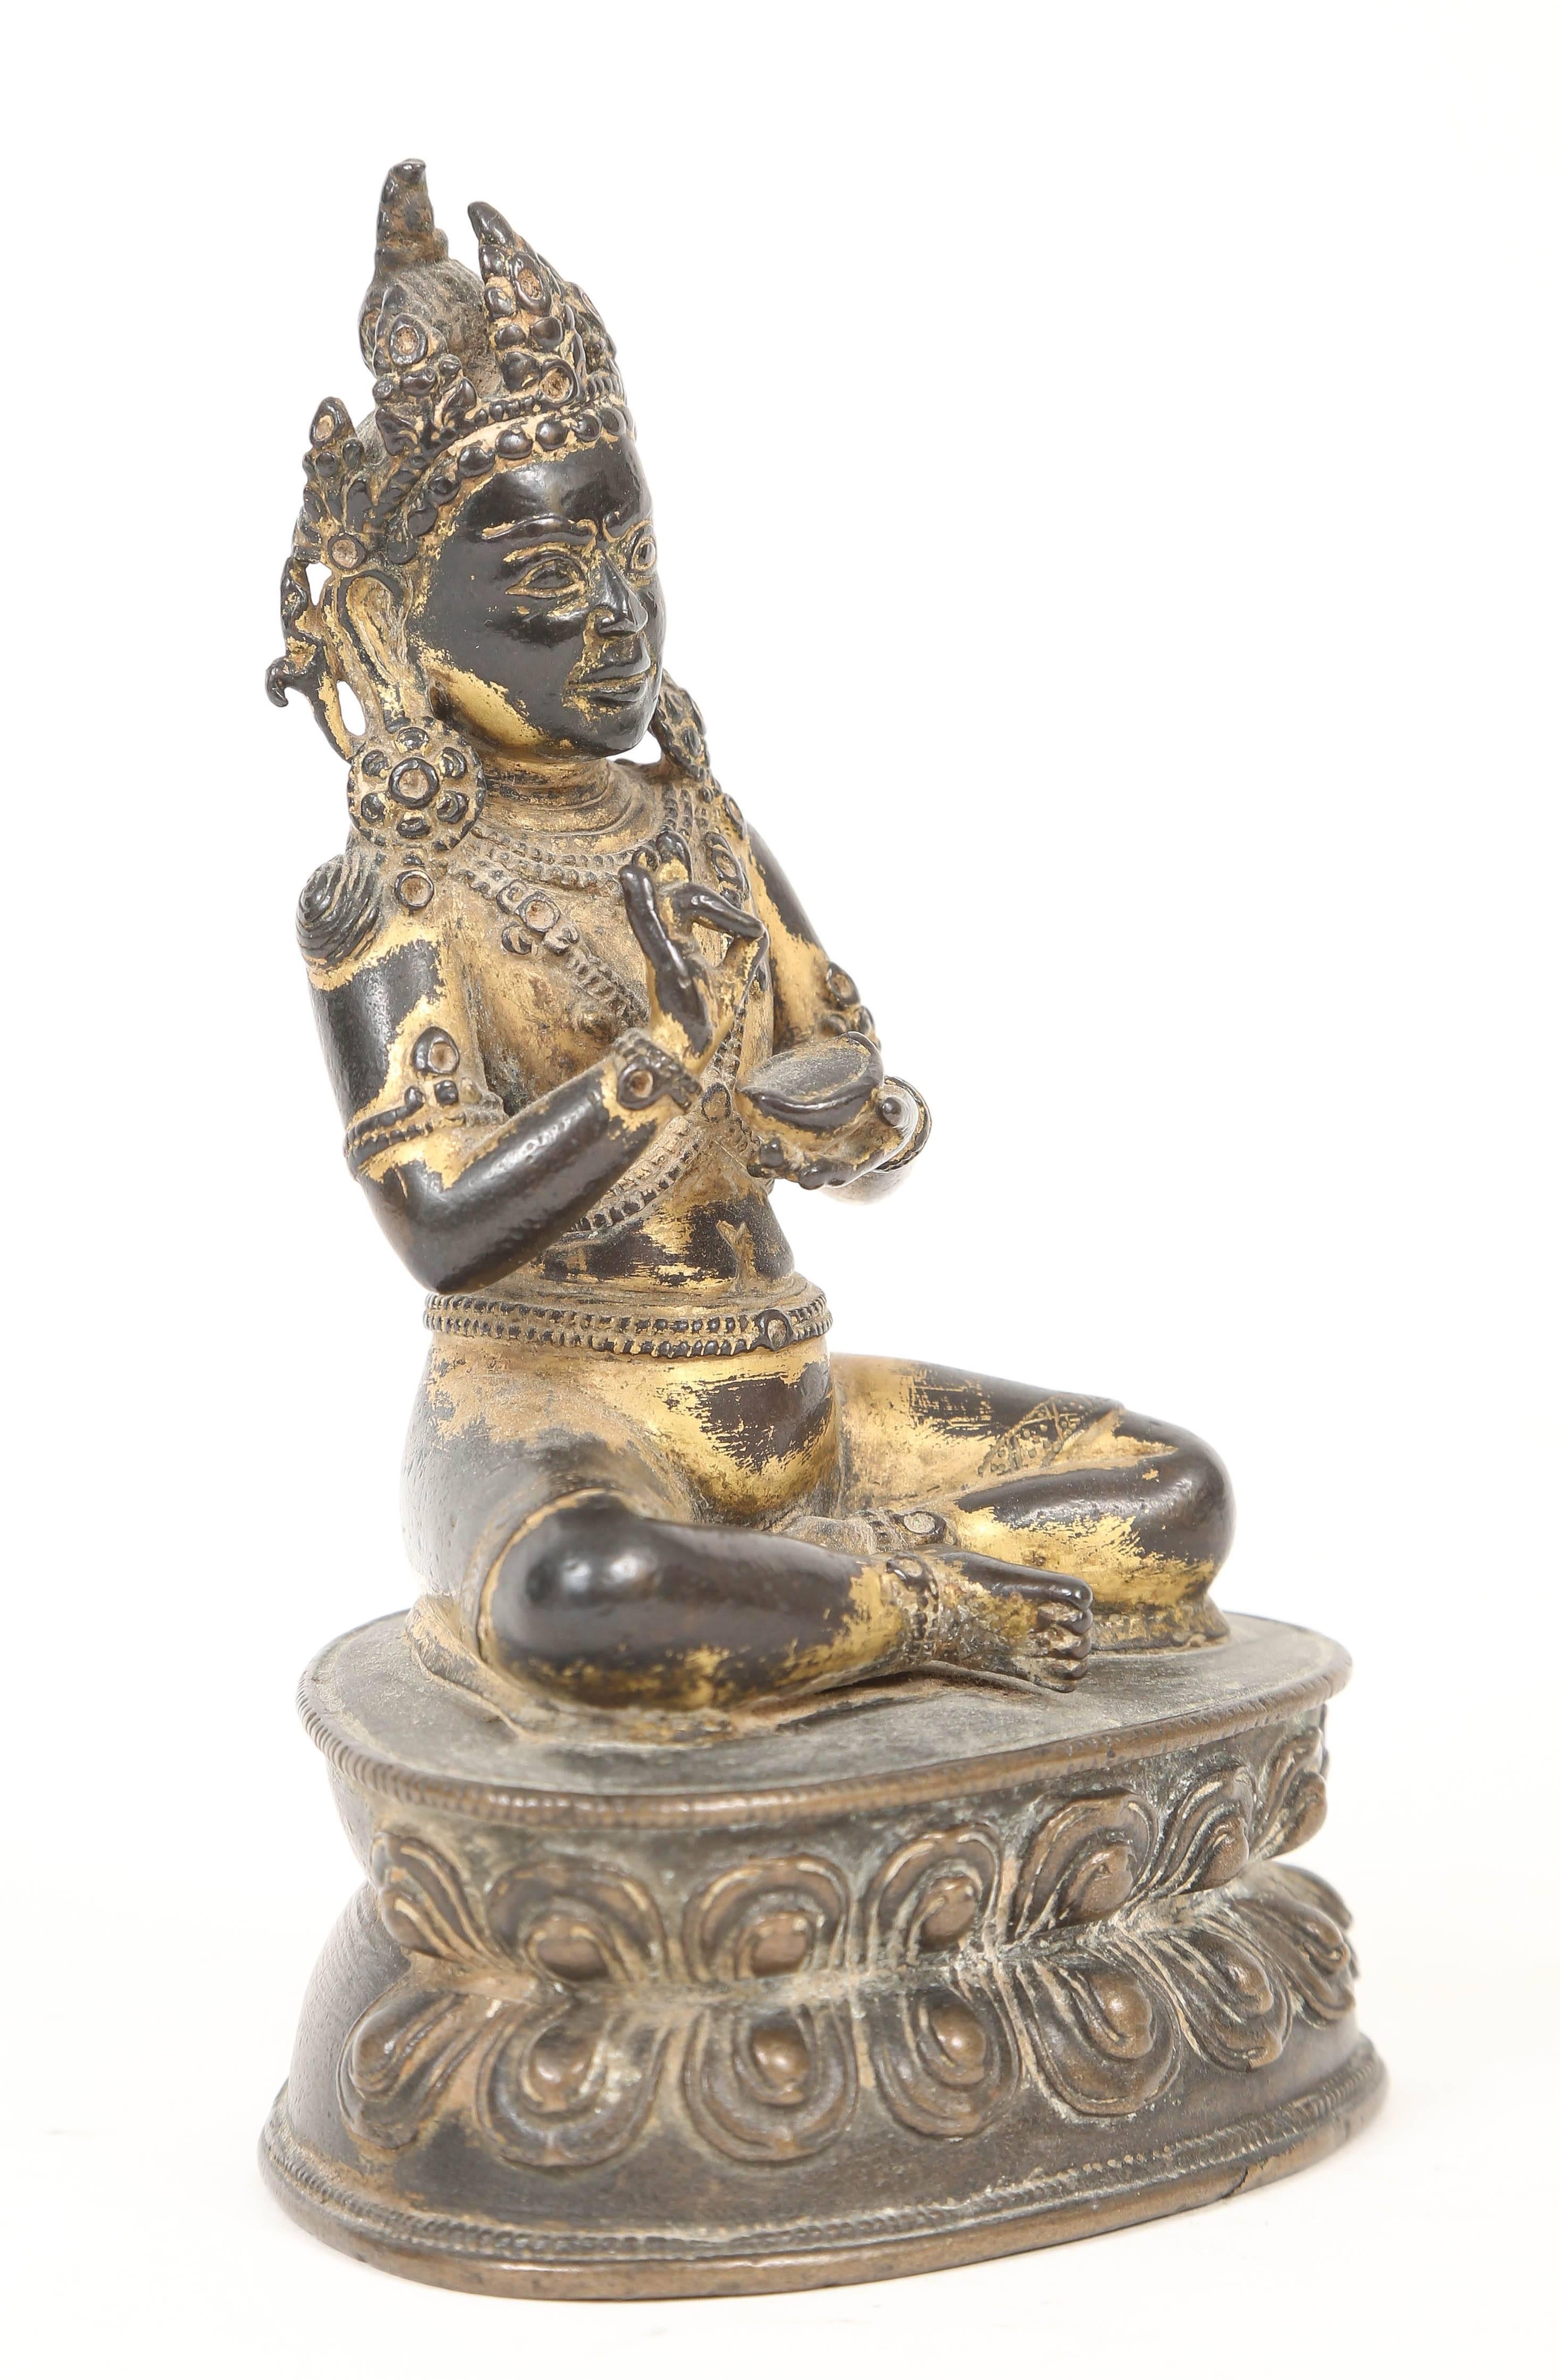 A gilt bronze figure of the Buddha Amitayus, Tibet, 18th century, cast in the Pala revival style, particularly popular in 18th century Tibeto-Chinese statuary, seated on a waisted lotus pedestal, cradling the amrita vase above his lap, adorned with